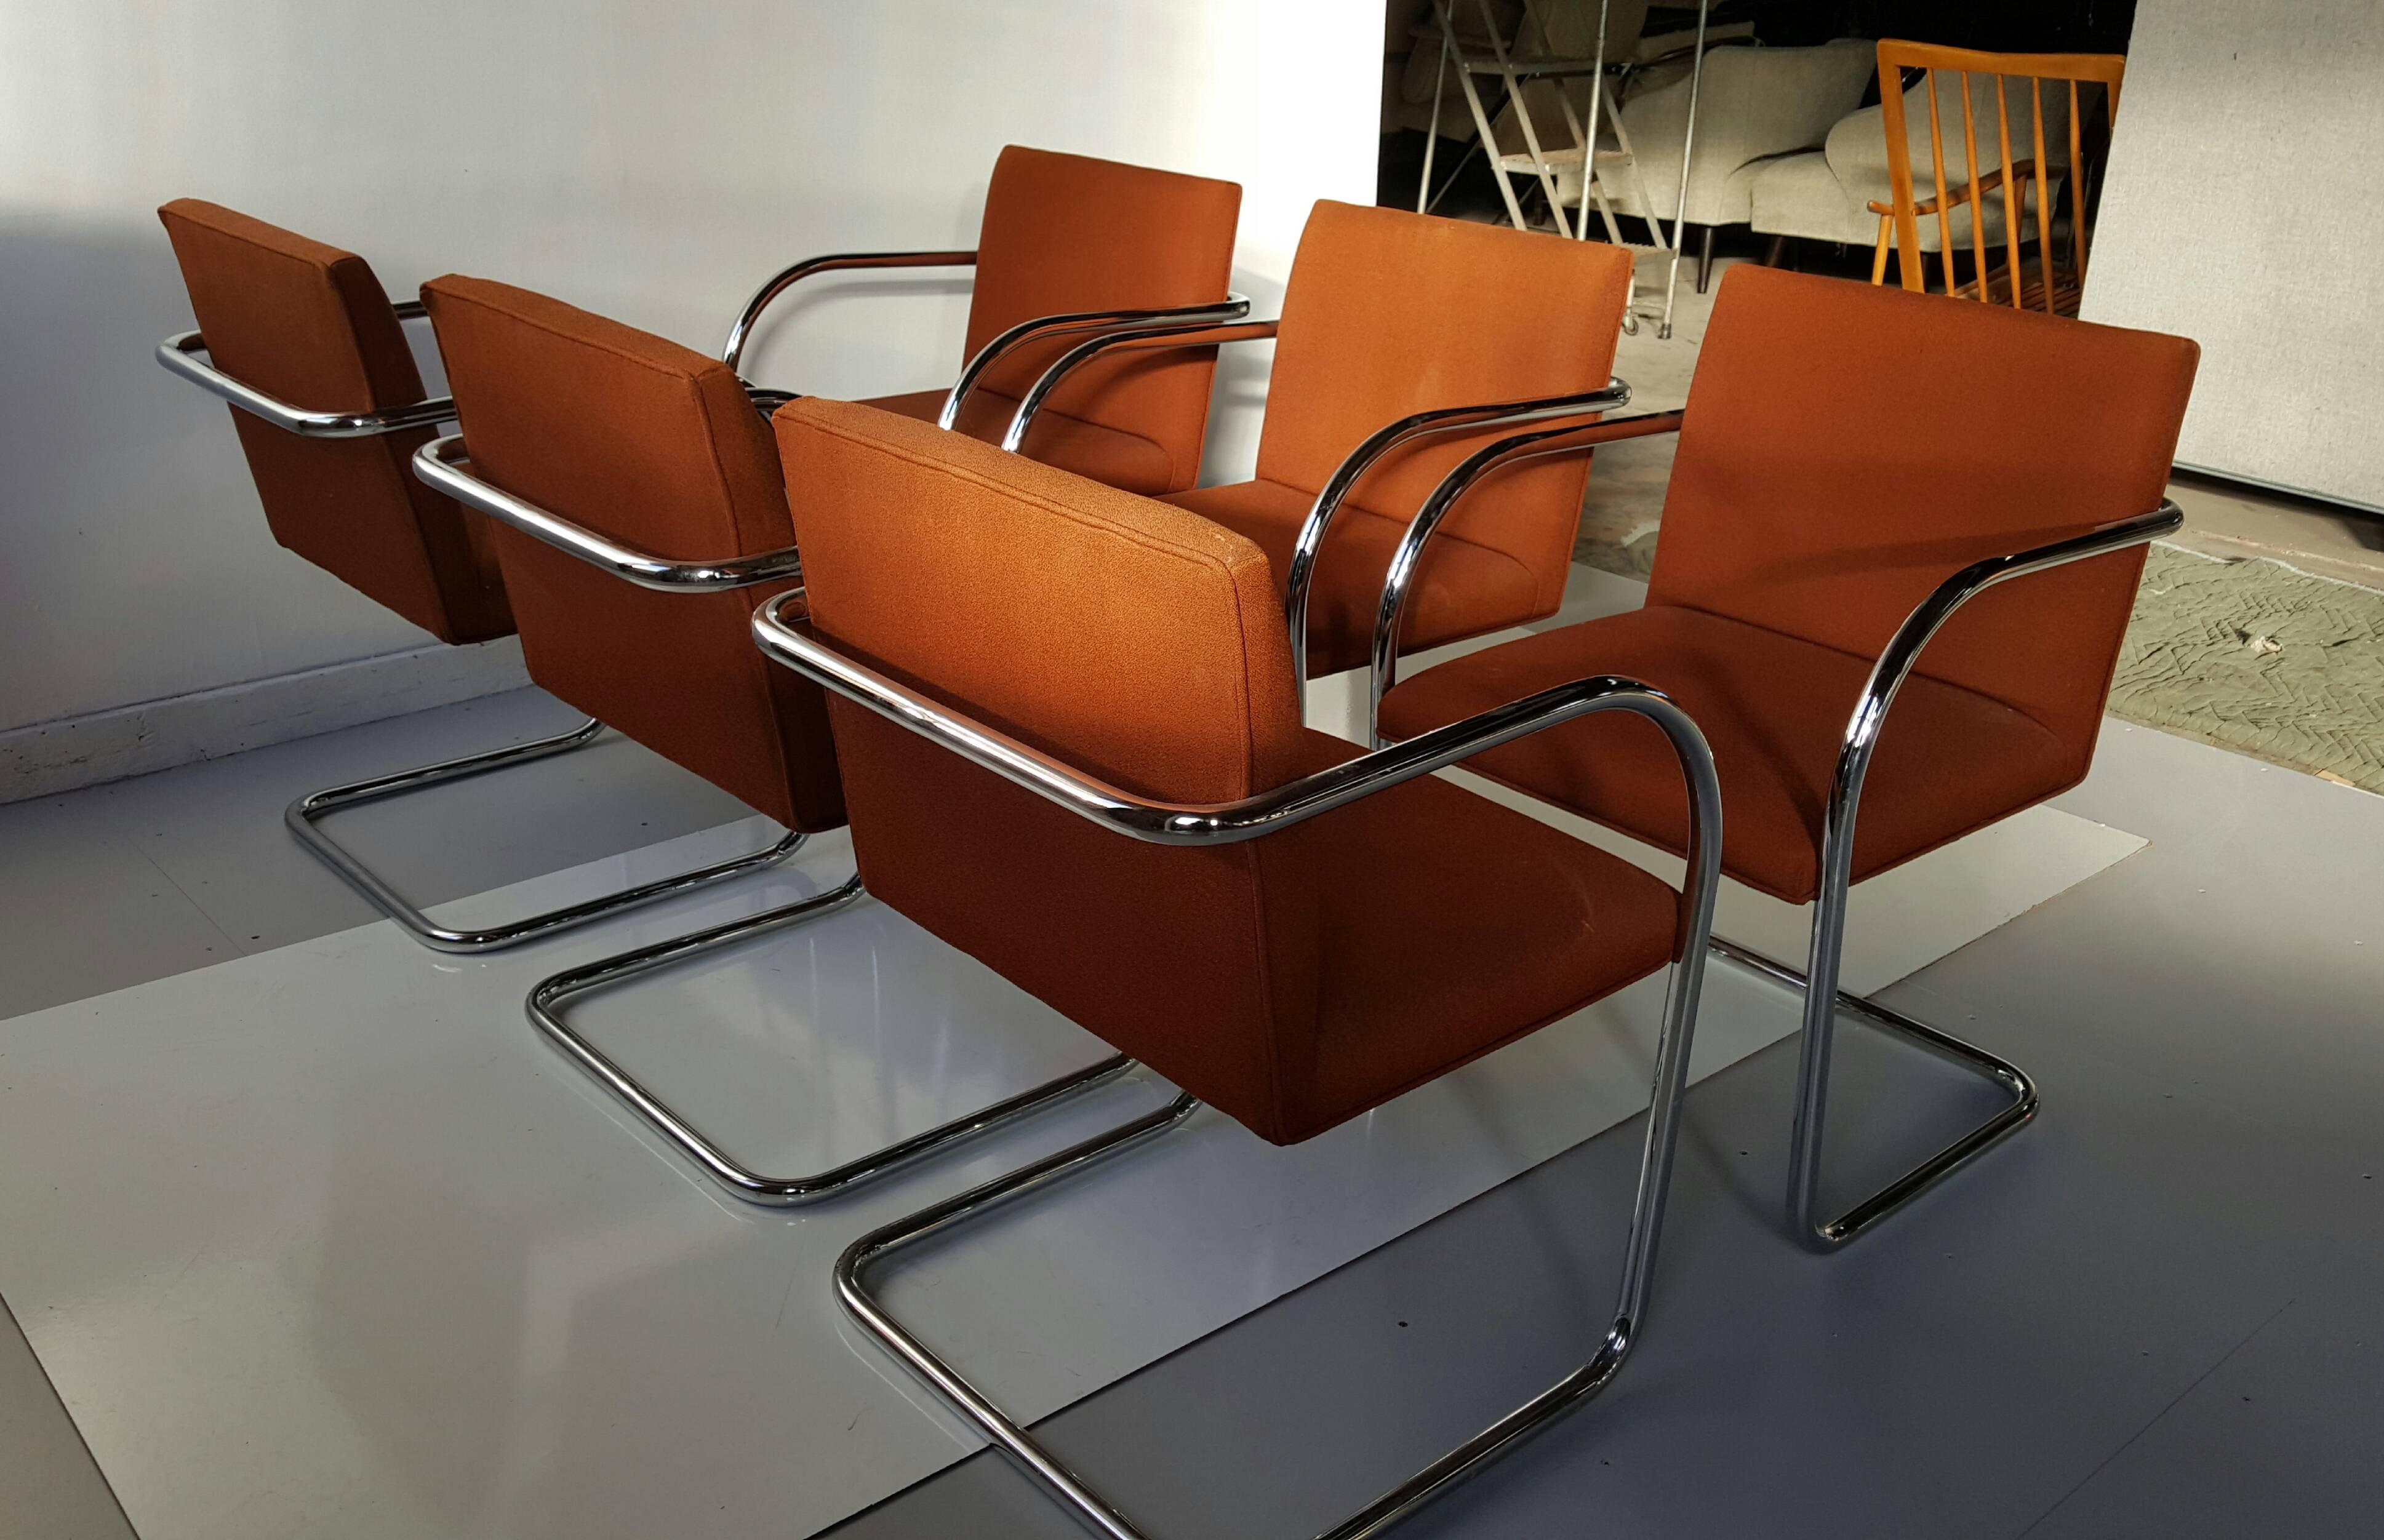 Classic set of 12 chromed steel armchairs. Brno, designed by Ludwig Mies van der Rohe and Lilly Reich, manufactured by Gordon International. Extremely comfortable. Suburb quality, retains original orange-brown wool fabric.

The Brno chair (model